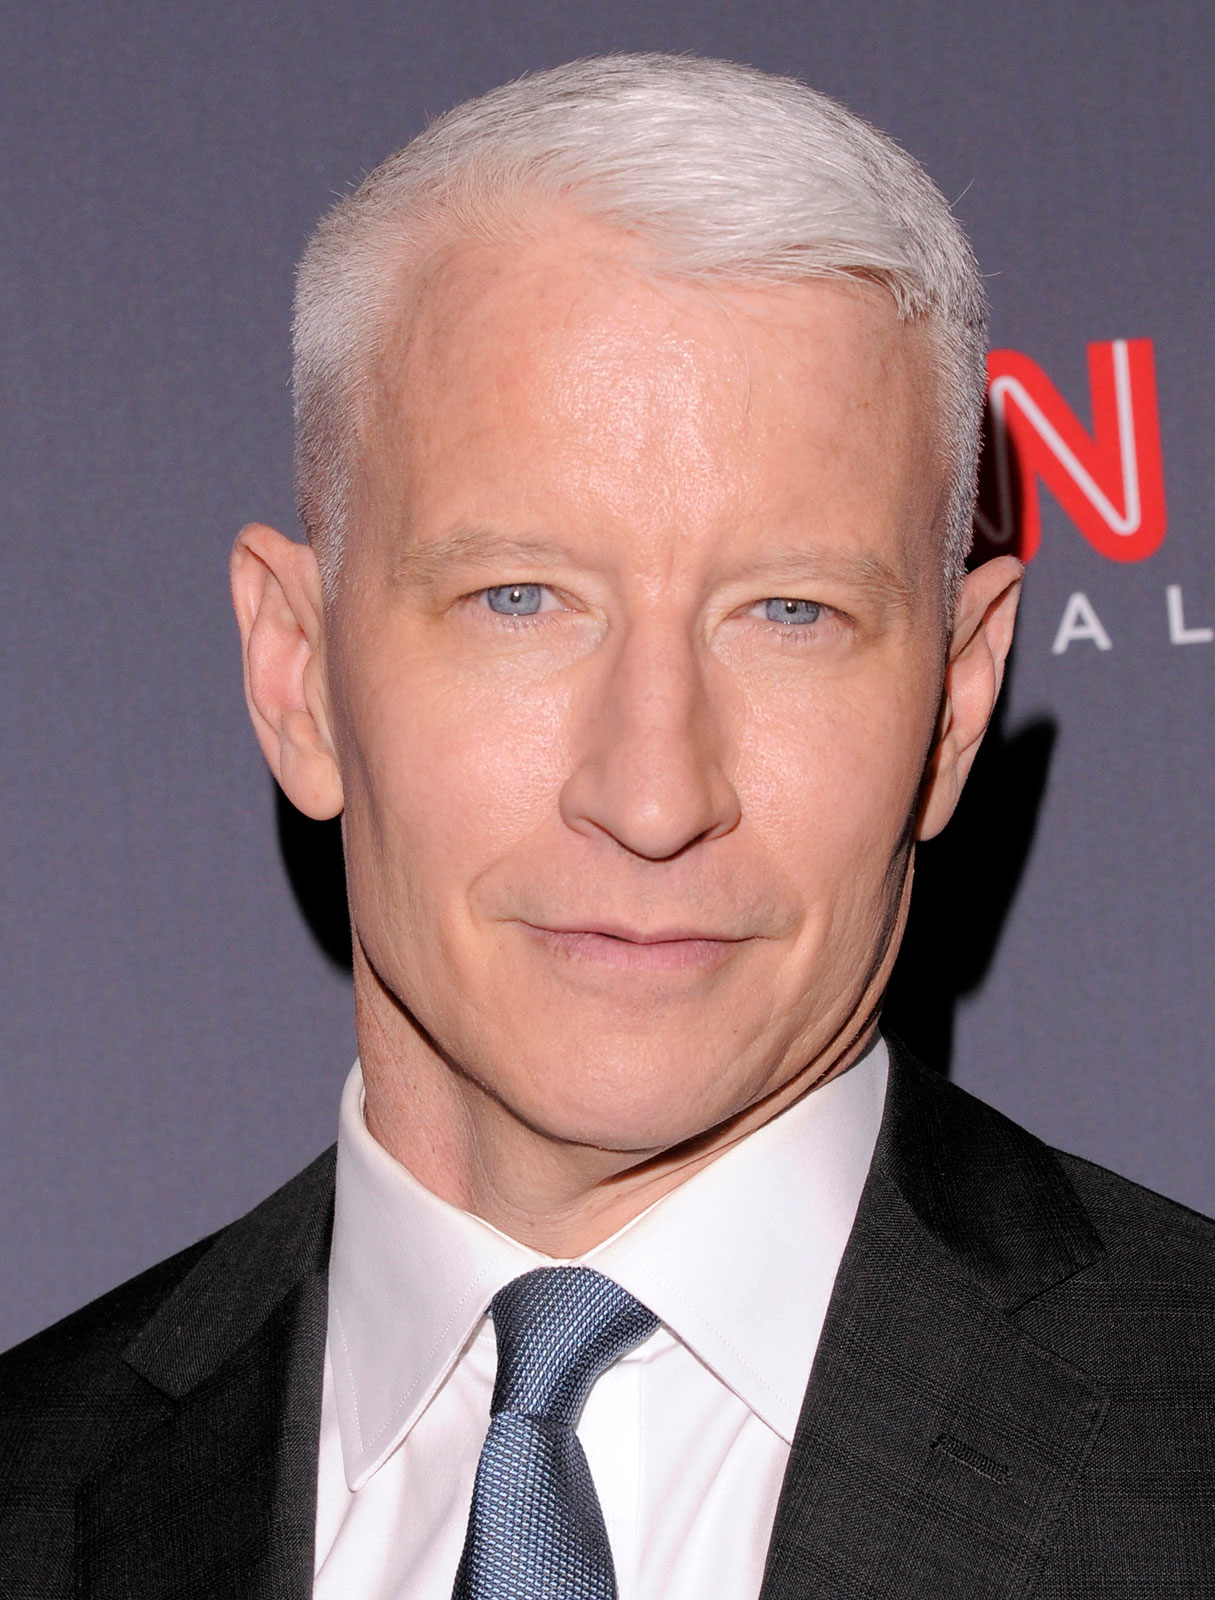 Anderson Cooper Biography Height Life Story Super Stars Bio